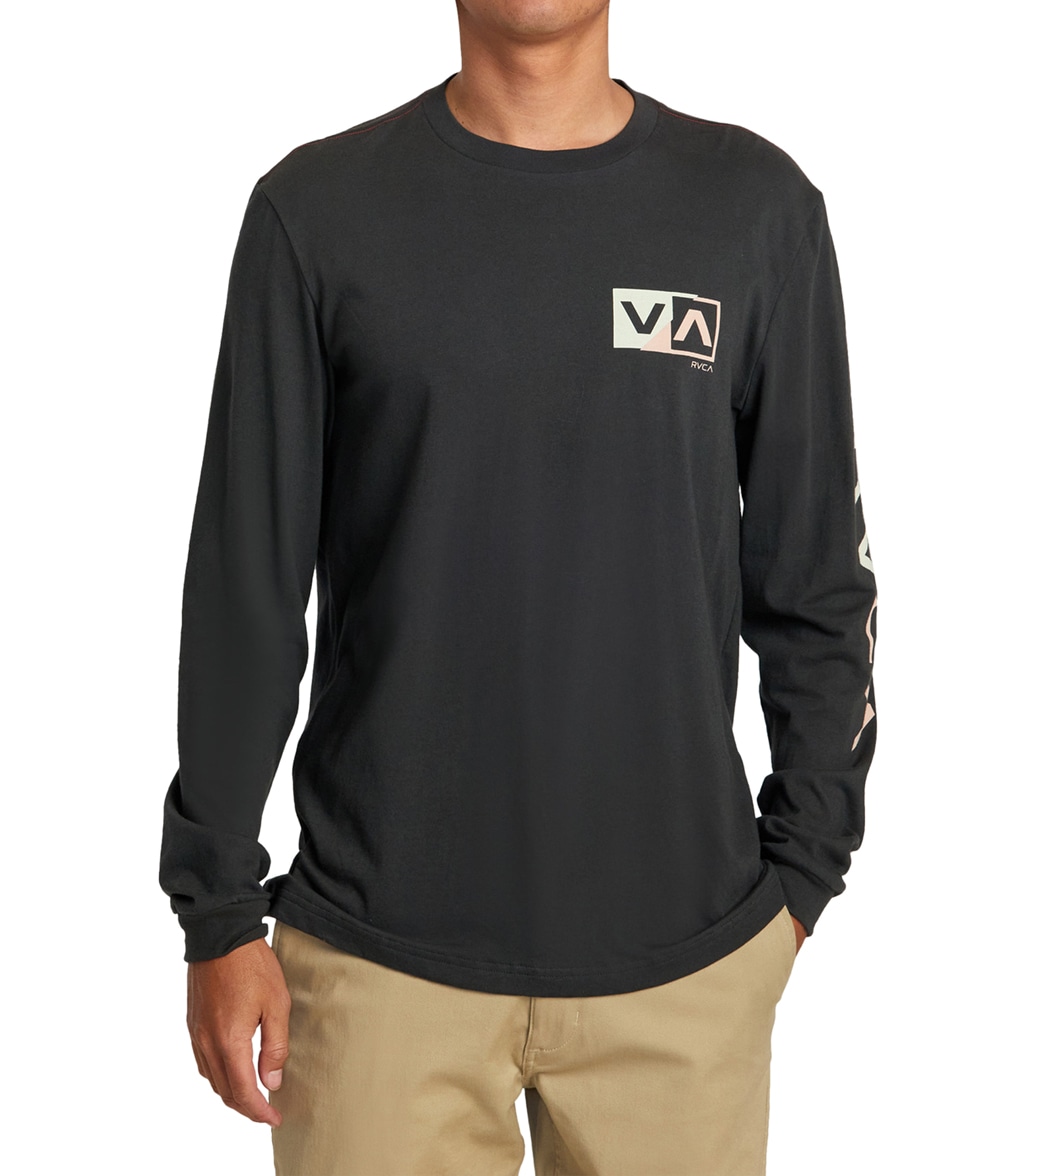 Rvca Men's Shifted Long Sleeve Tee Shirt - Pirate Black Large Cotton - Swimoutlet.com